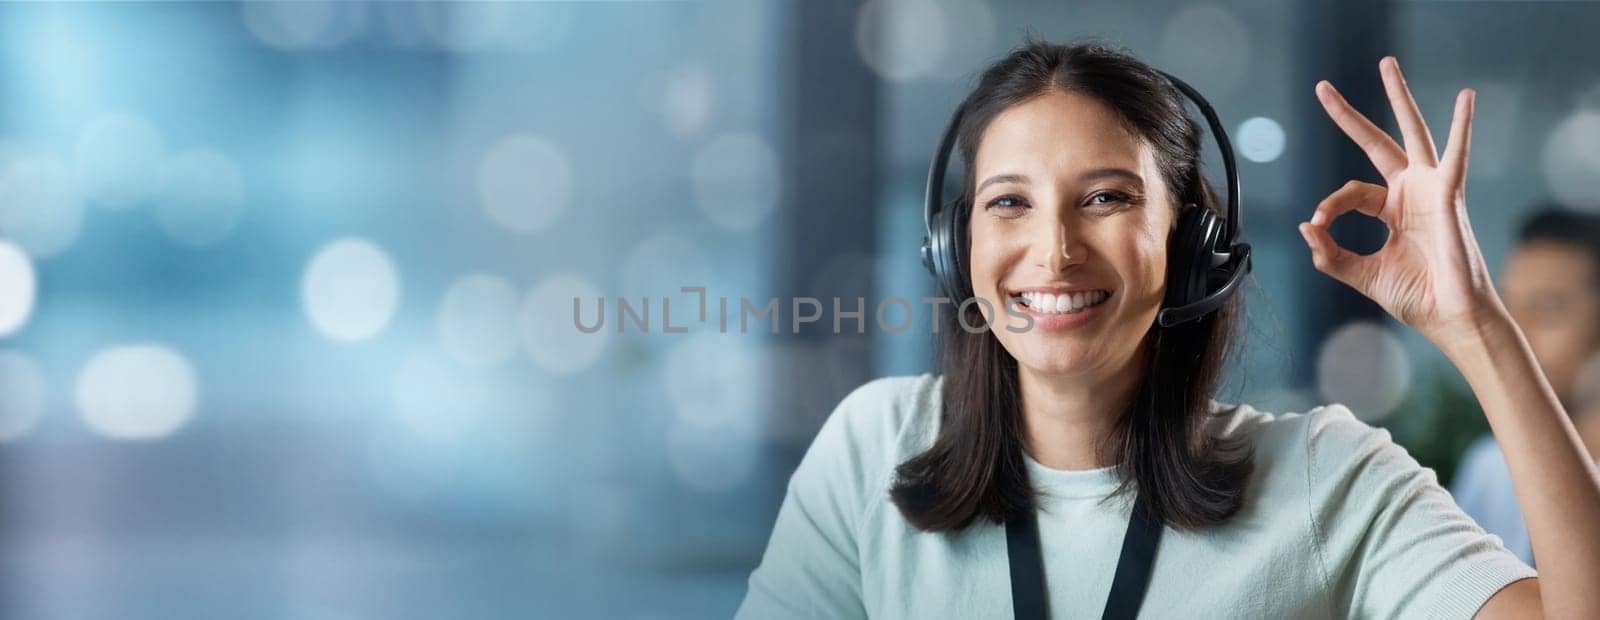 Portrait, mockup or happy consultant in a call center helping, talking or networking online with success. Ok hand gesture, woman or insurance agent in communication at customer services or sales job.